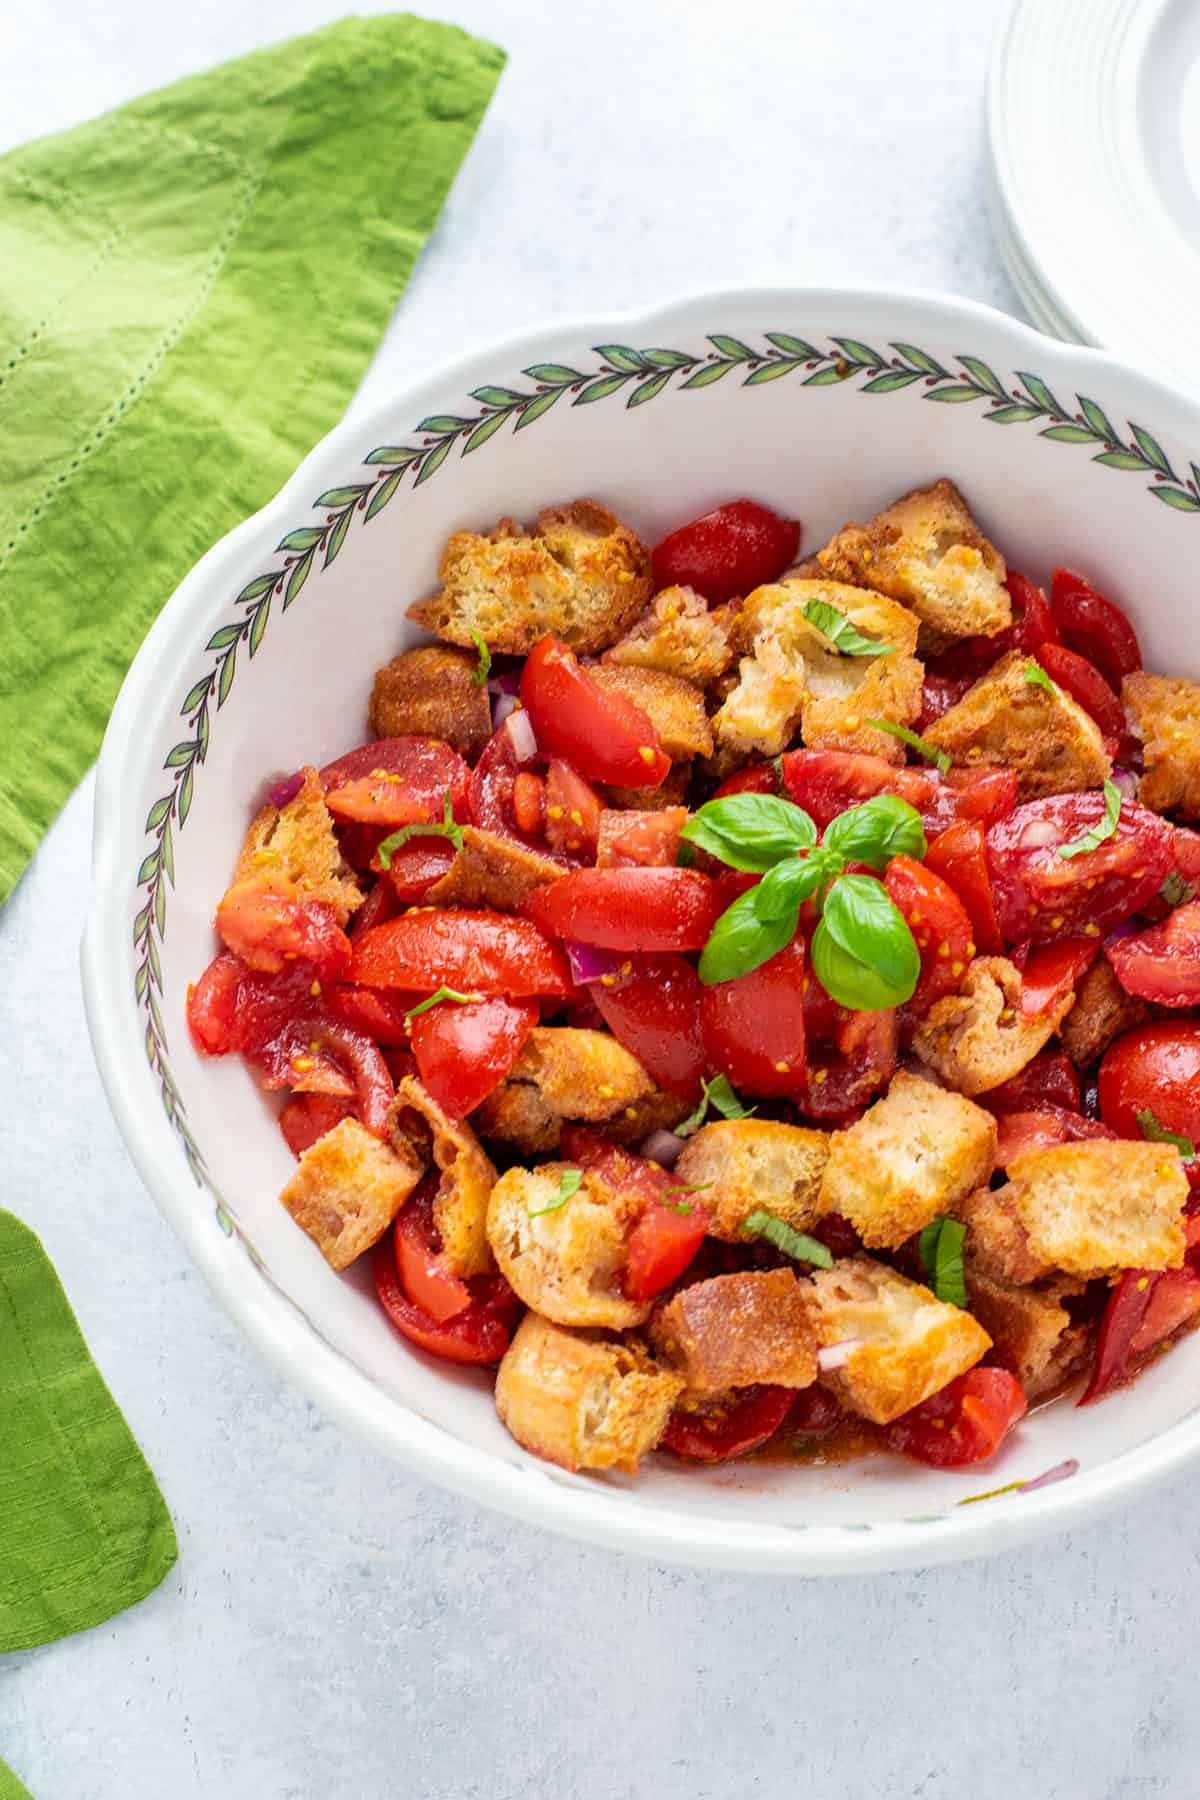 bowl of bread and tomato salad garnished with basil leaves